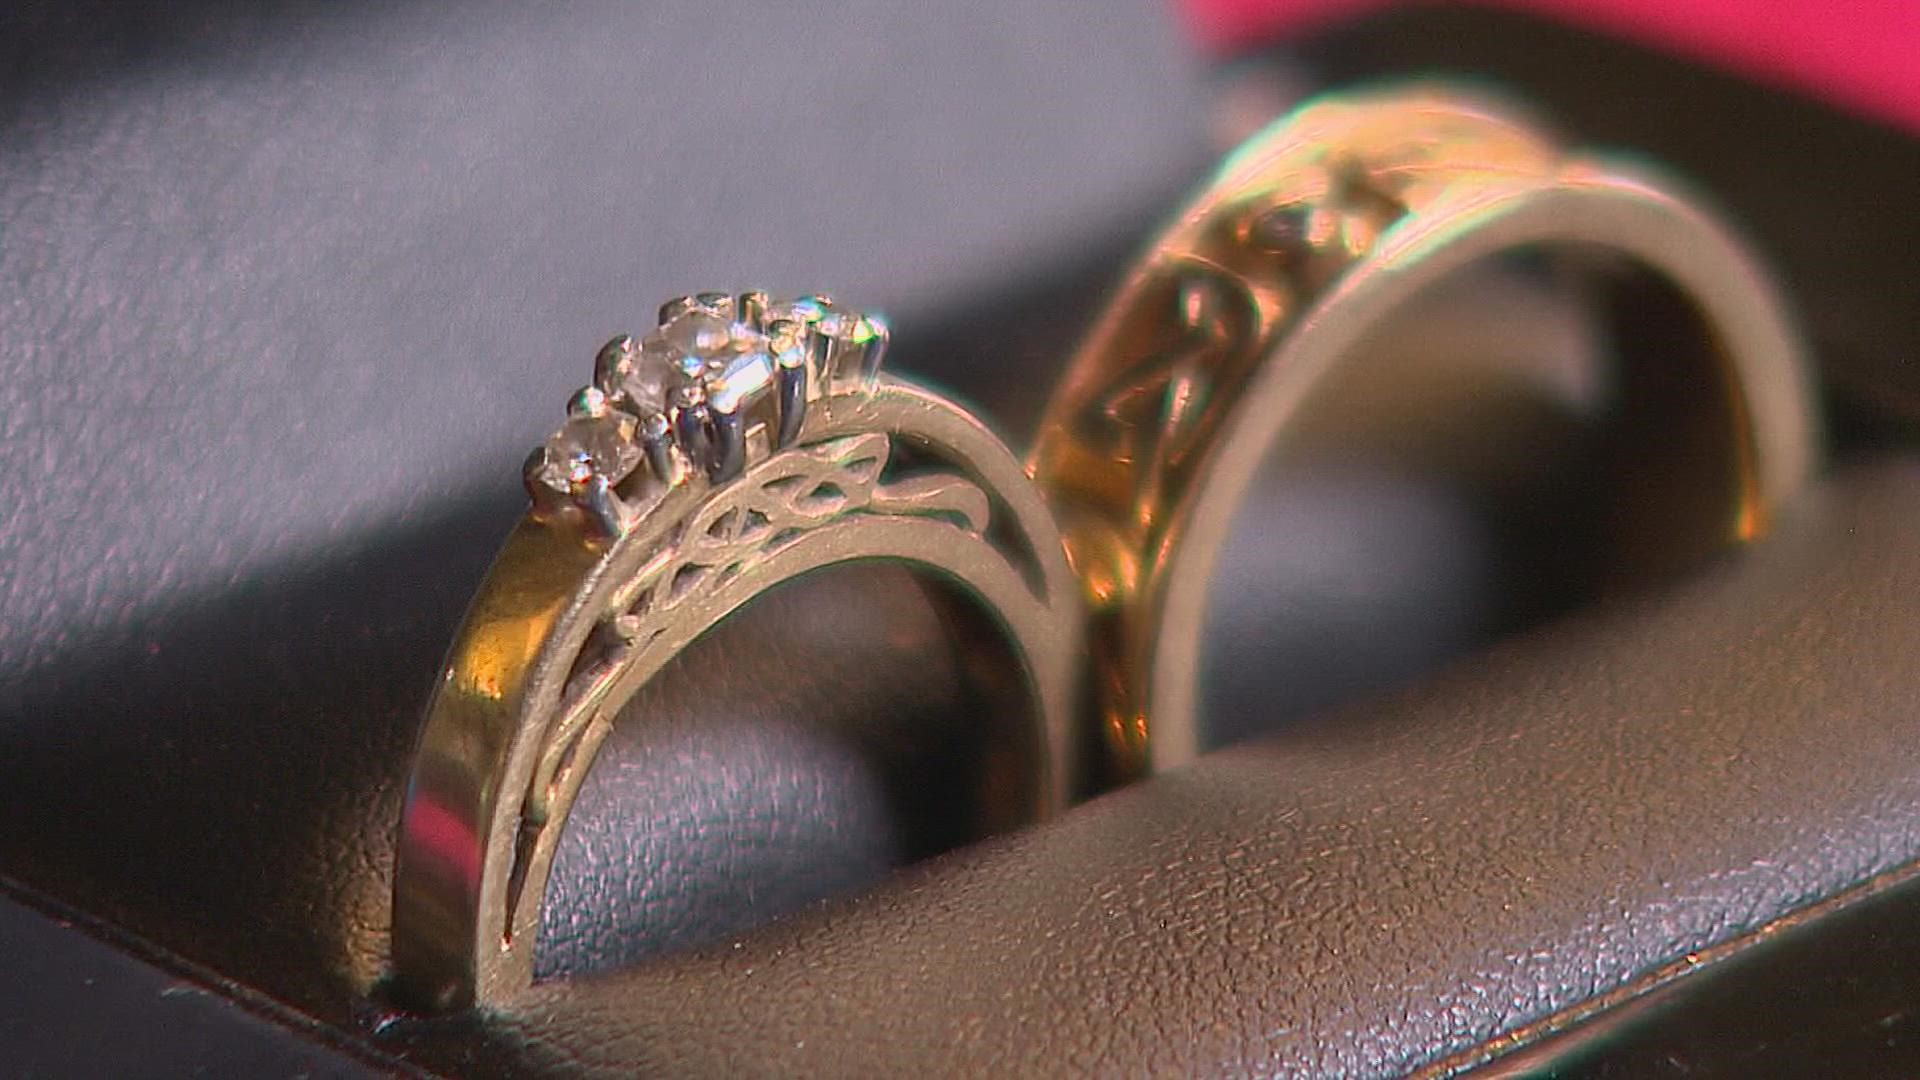 The Mahar-Wieser family was vacationing in Mexico in April of 2019 when a wedding ring vanished.